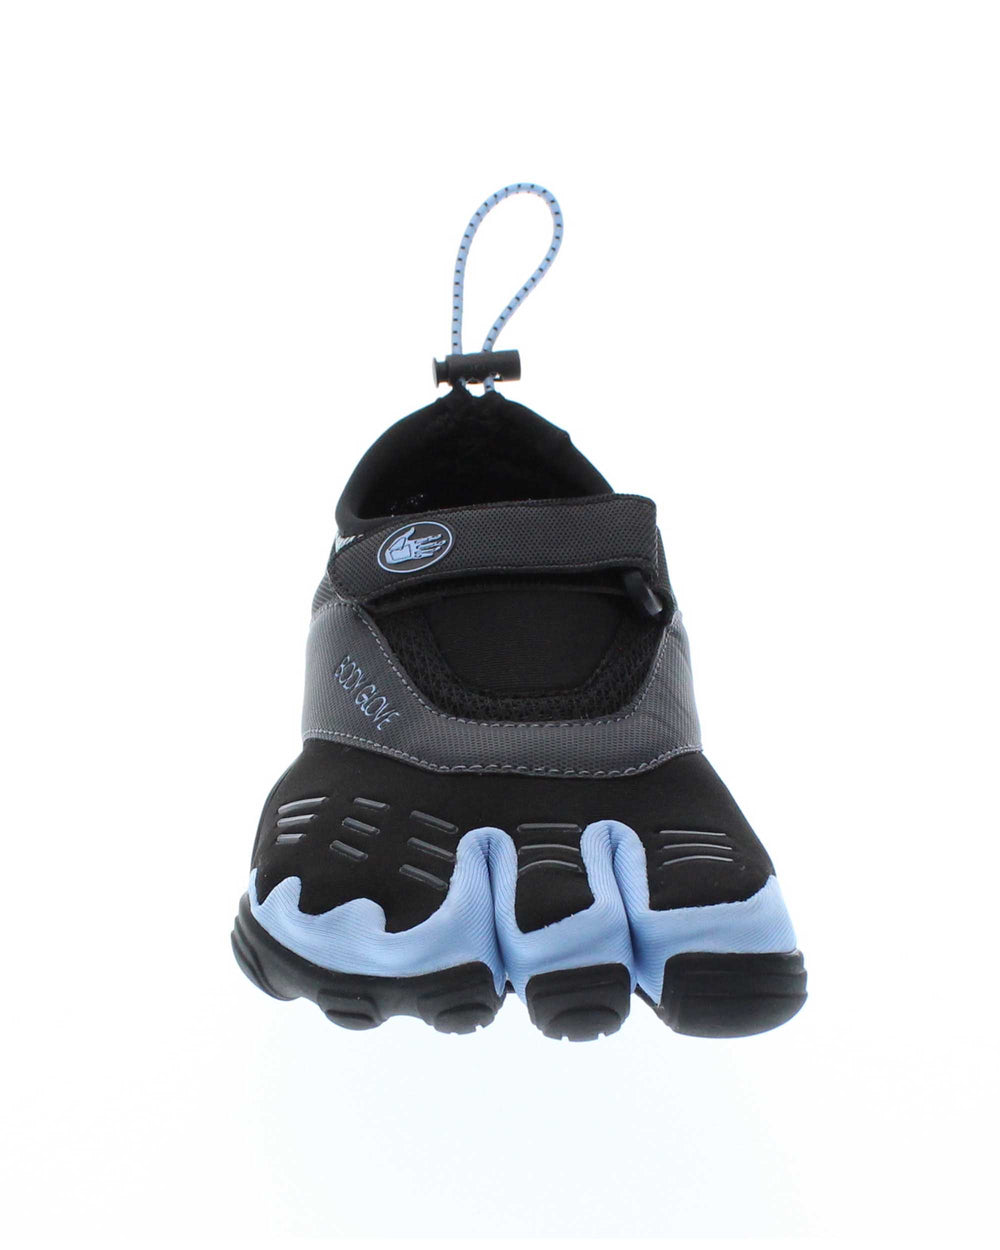 Women's 3T Barefoot Max Water Shoes - Black/Sky